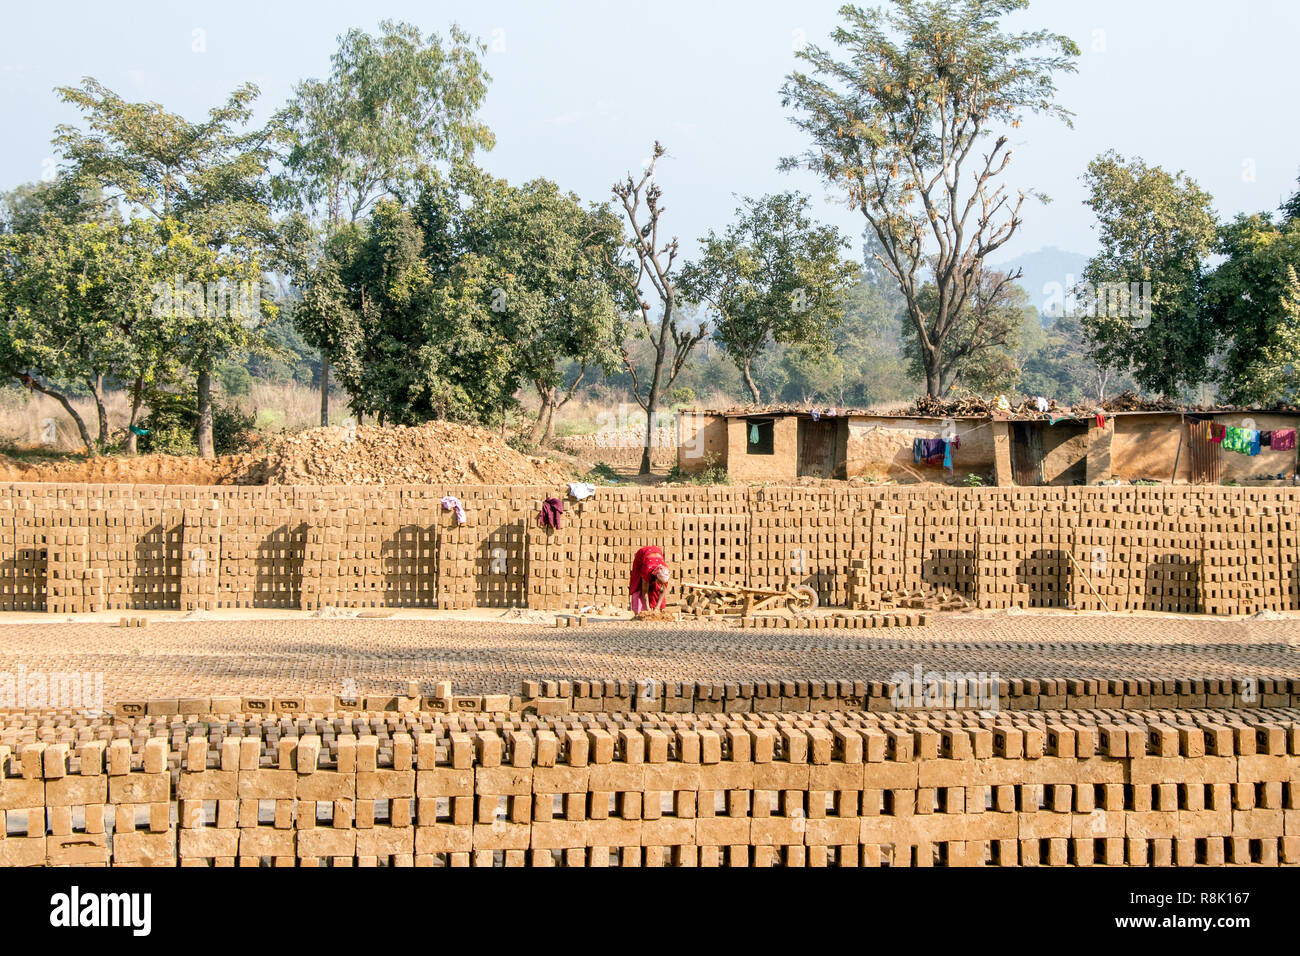 Row soil mud bricks place in open to drying. labour woman making bricks Stock Photo